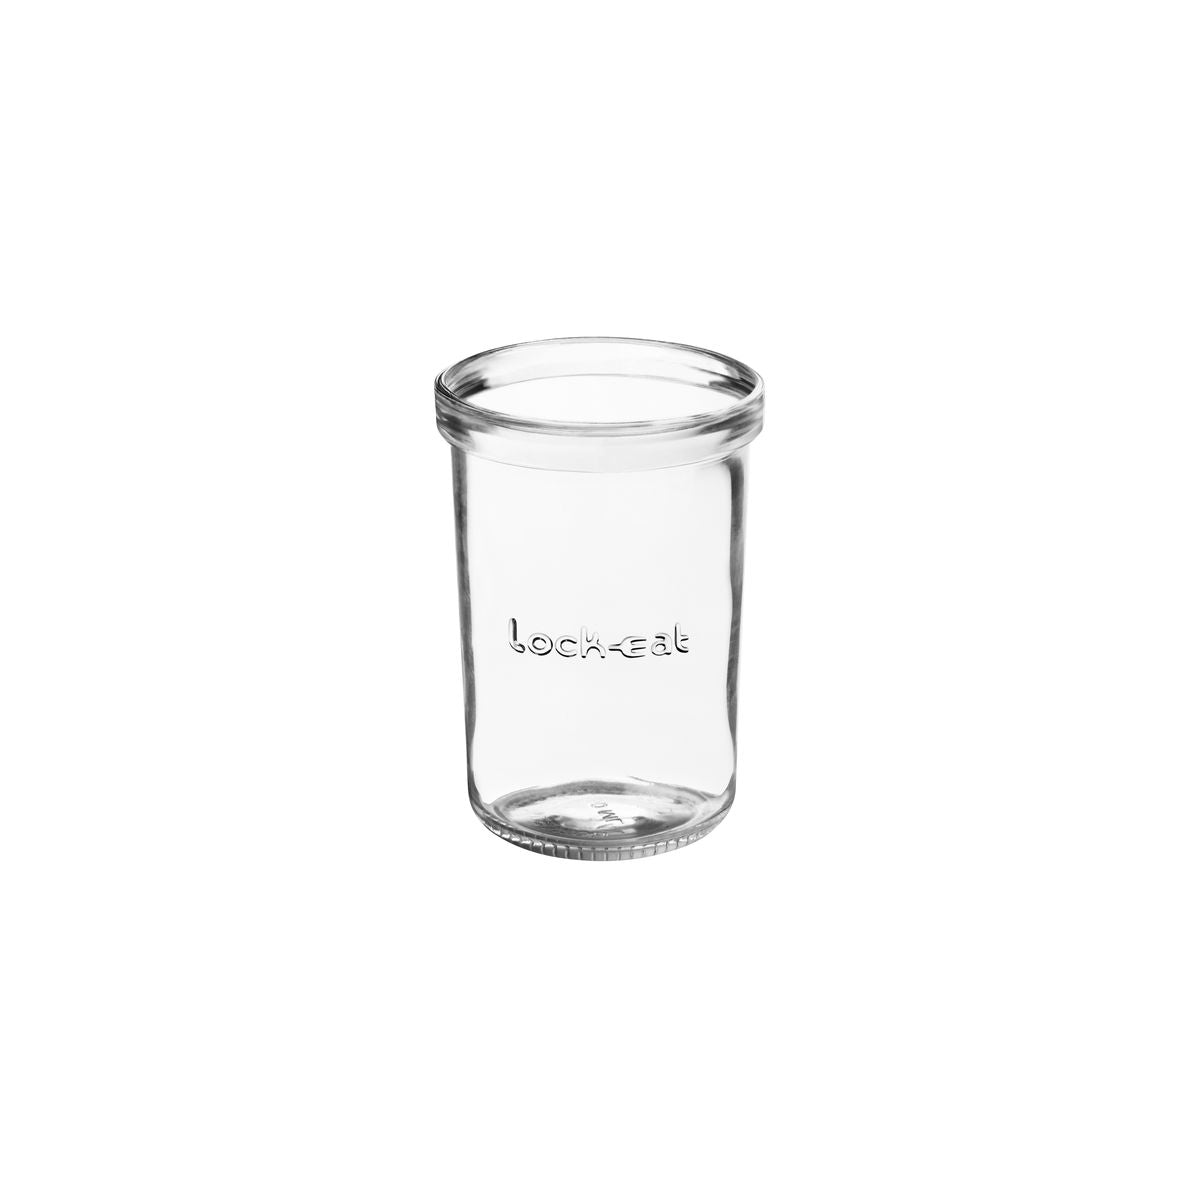 Food Jar, 350ml - Lock Eat from Luigi Bormioli. made out of Glass and sold in boxes of 12. Hospitality quality at wholesale price with The Flying Fork! 